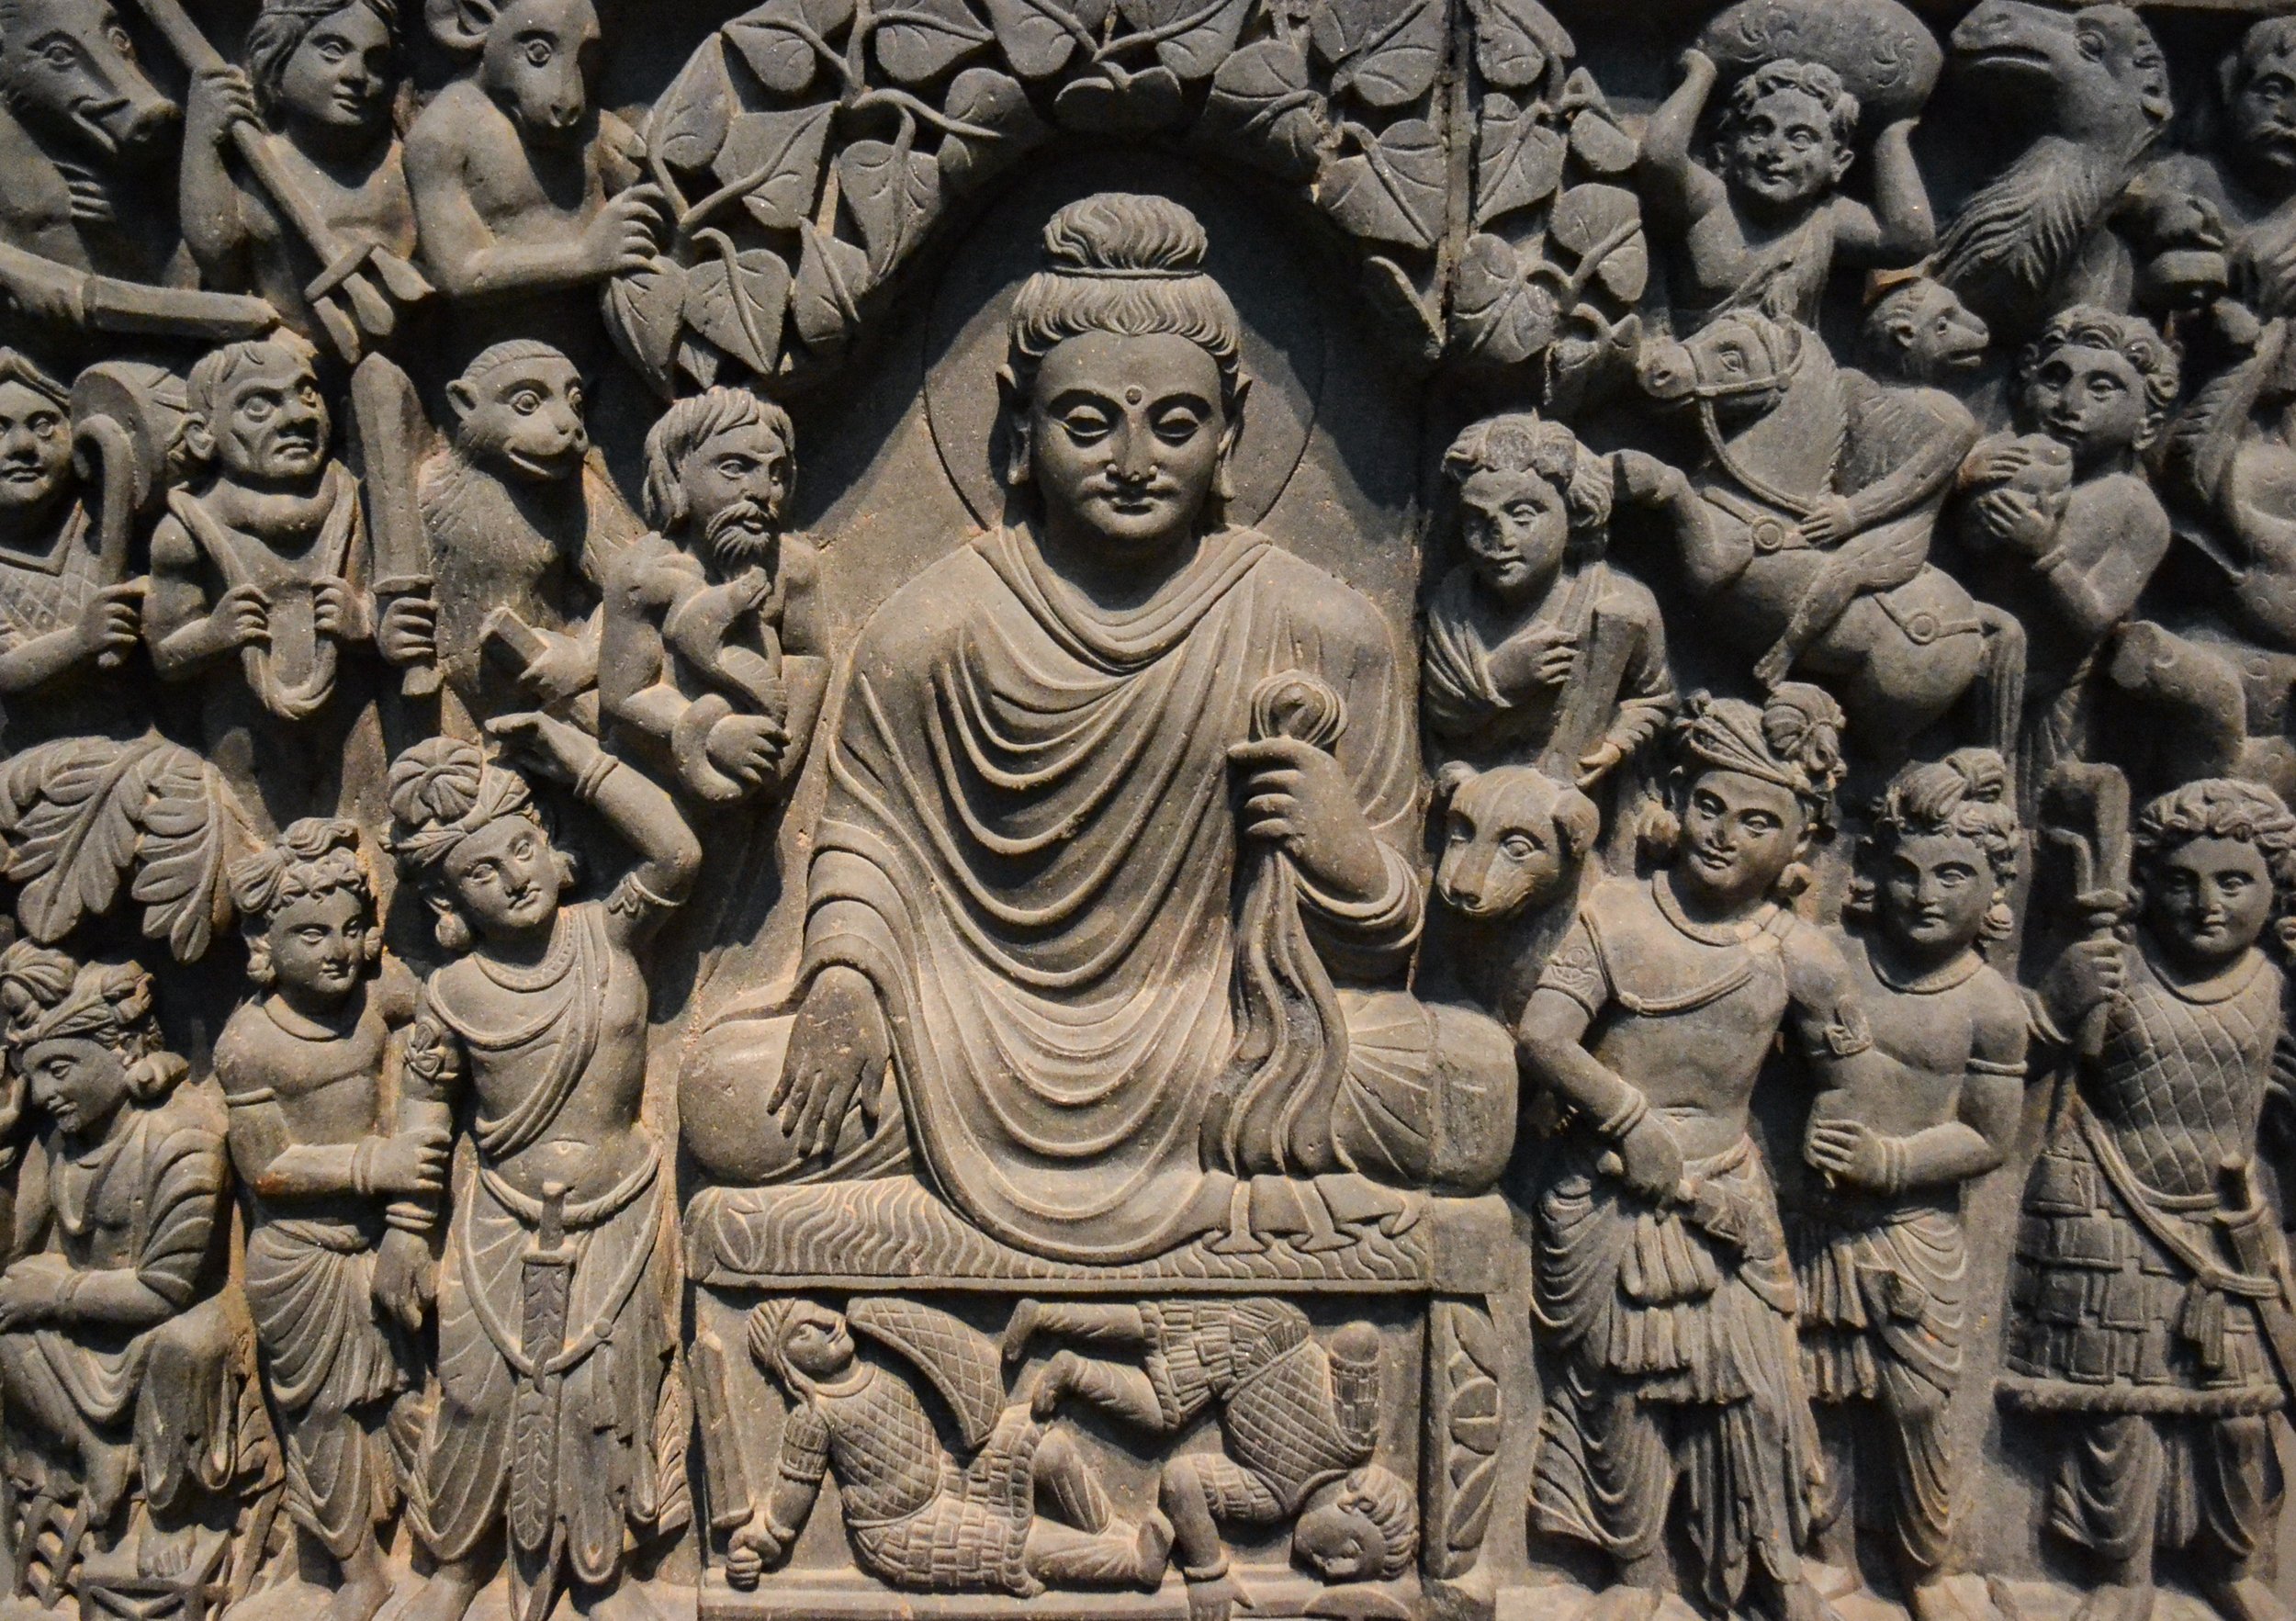 The Buddha's Enlightenment